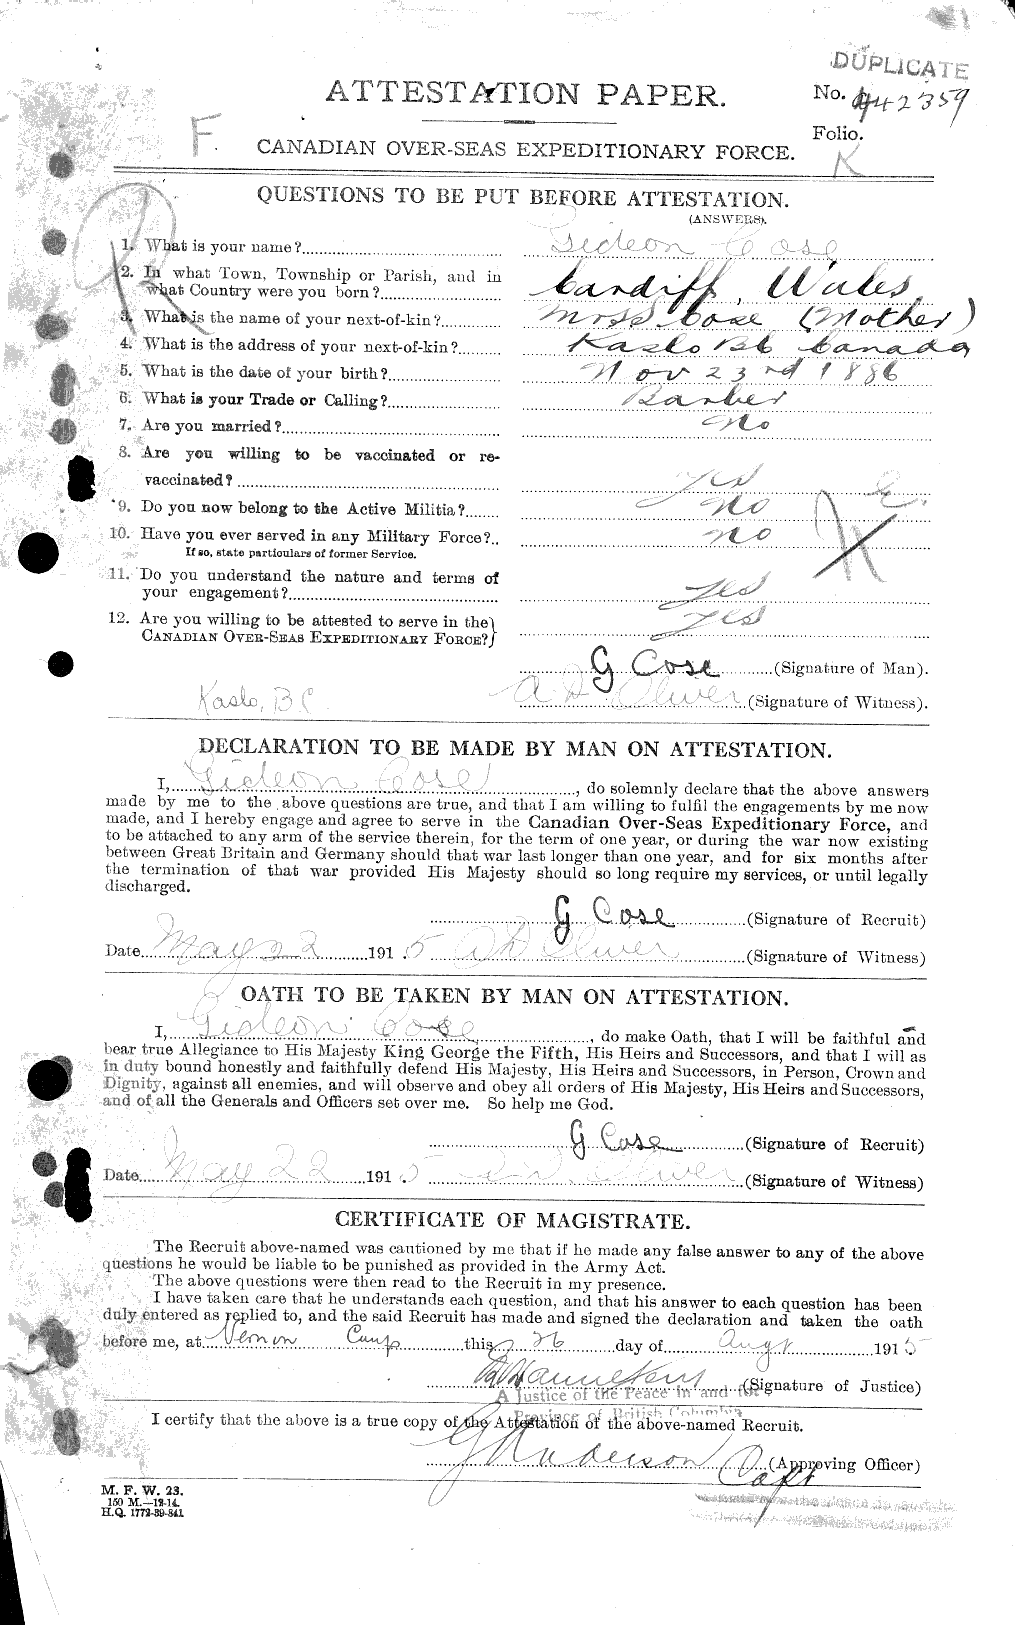 Personnel Records of the First World War - CEF 012708a